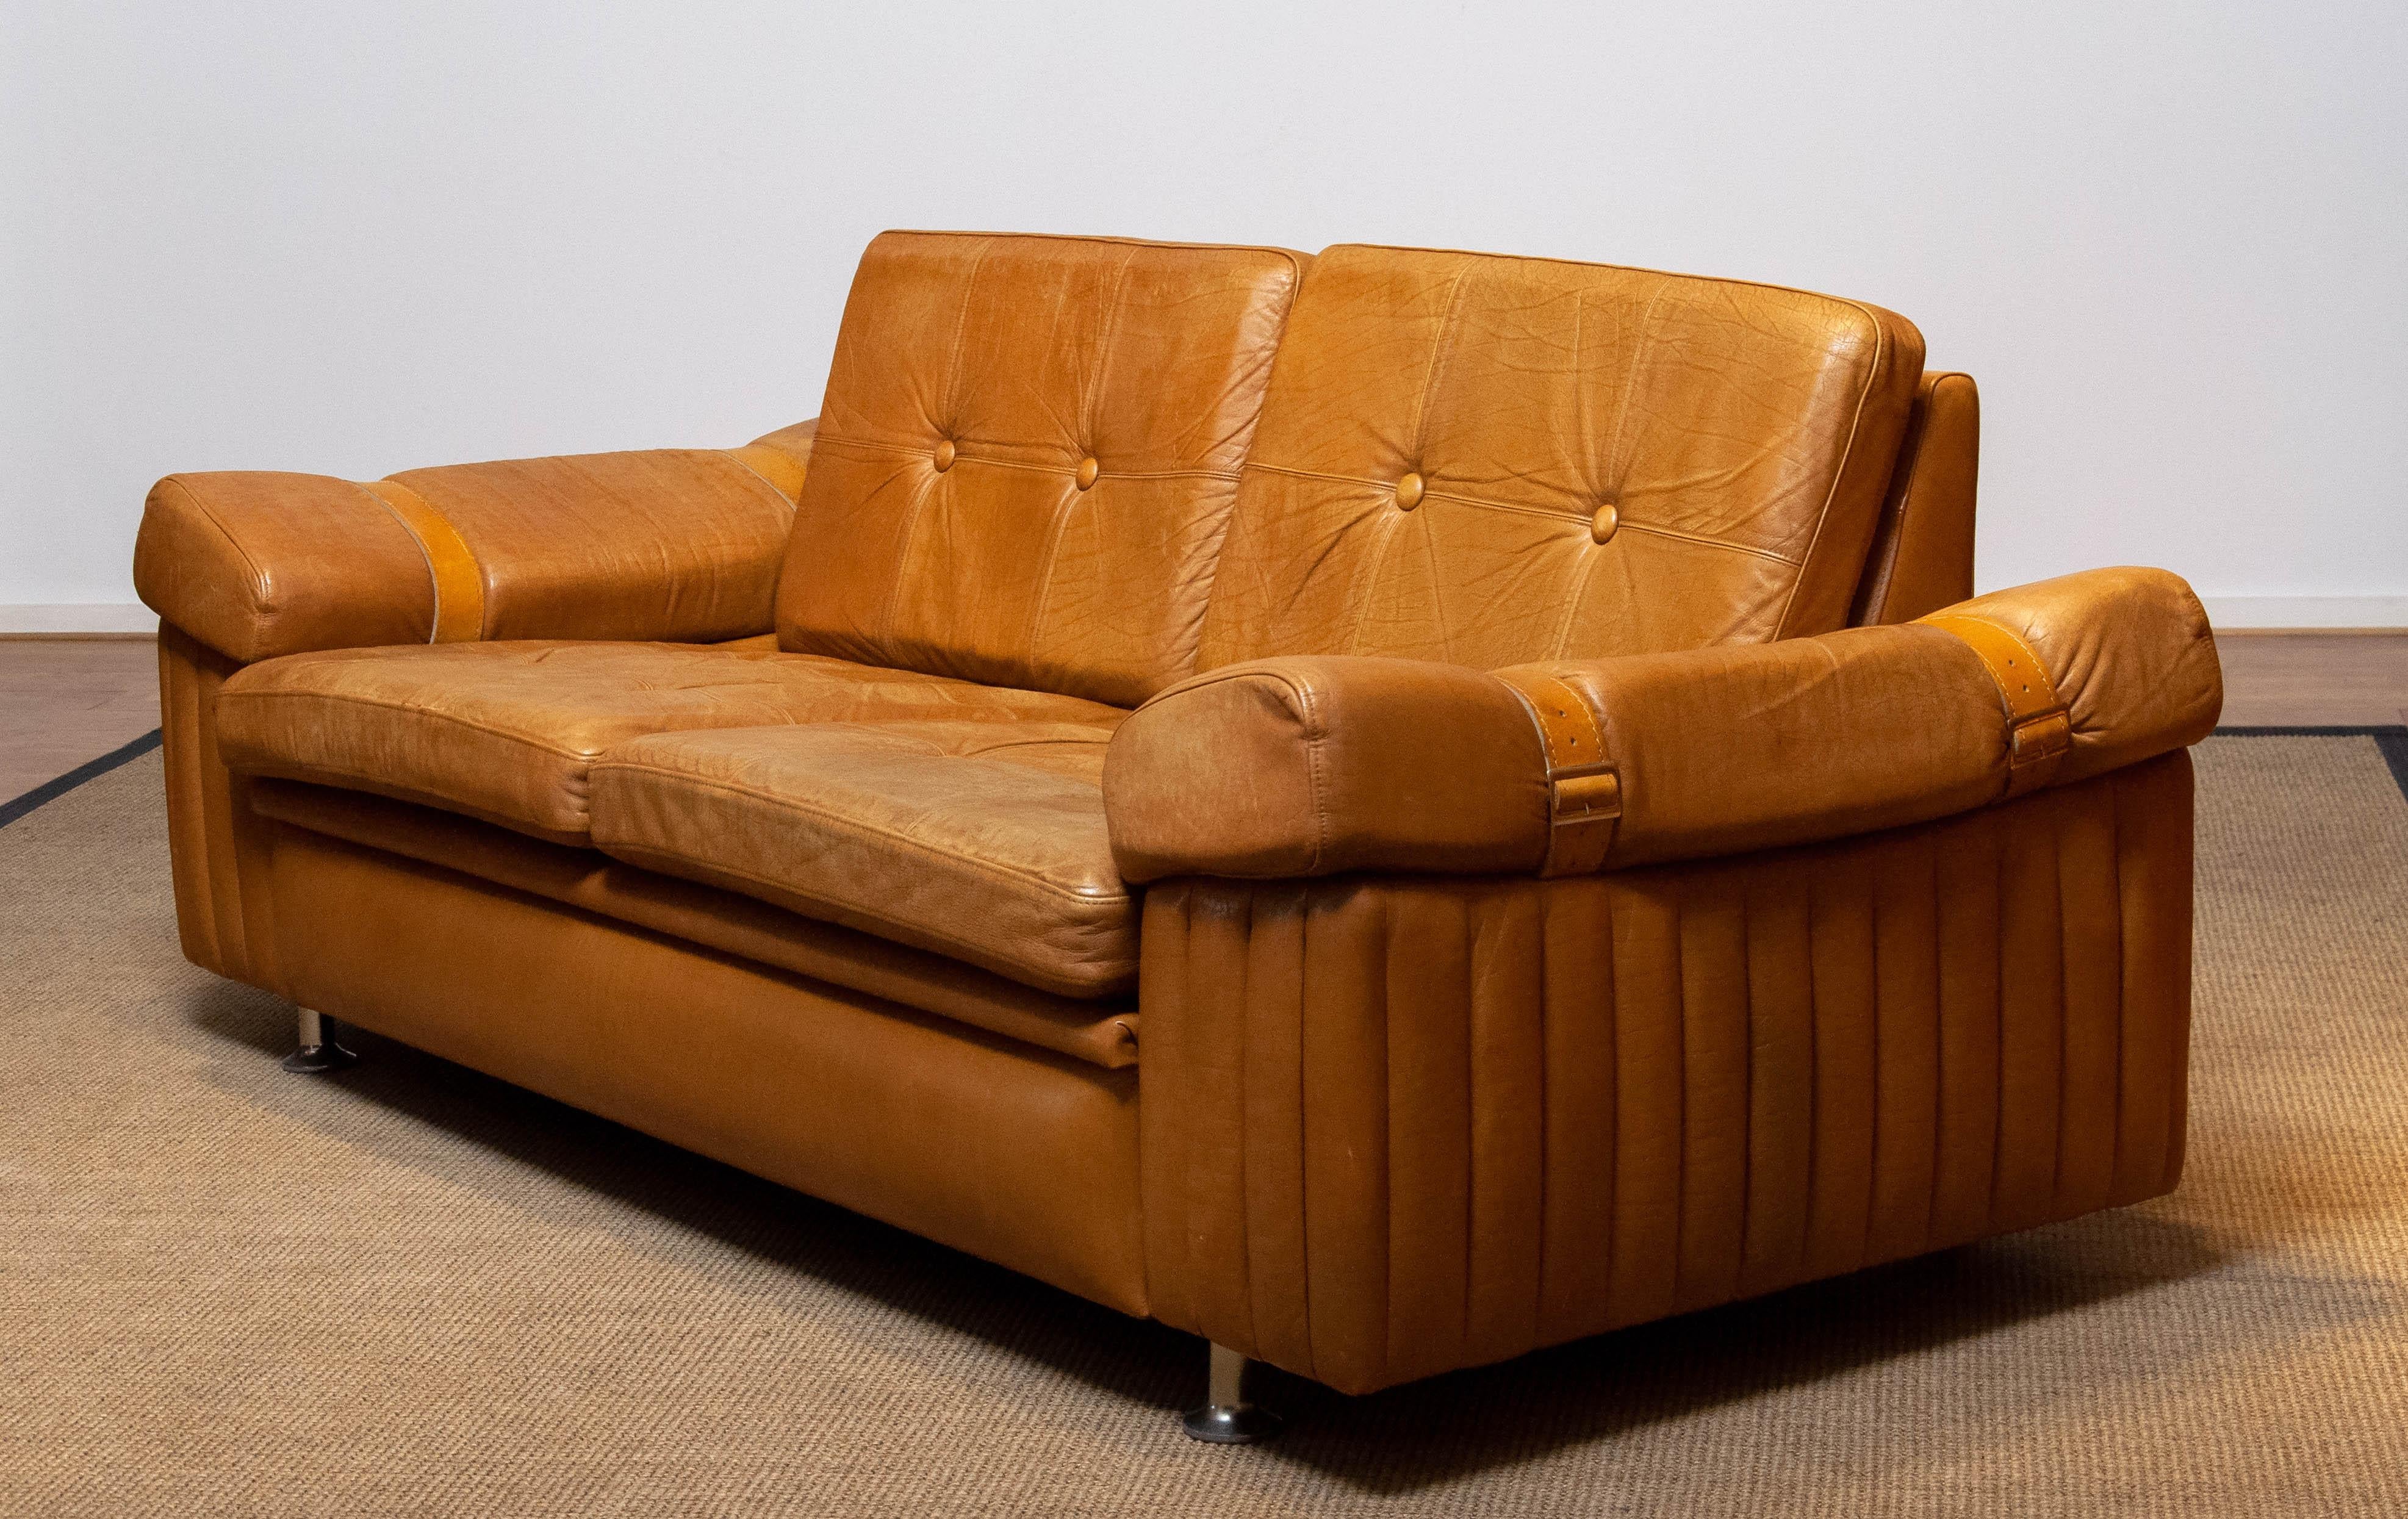 1970s Scandinavian Brutalist Two-Seater Low-Back Sofa in Camel Colored Leather For Sale 1